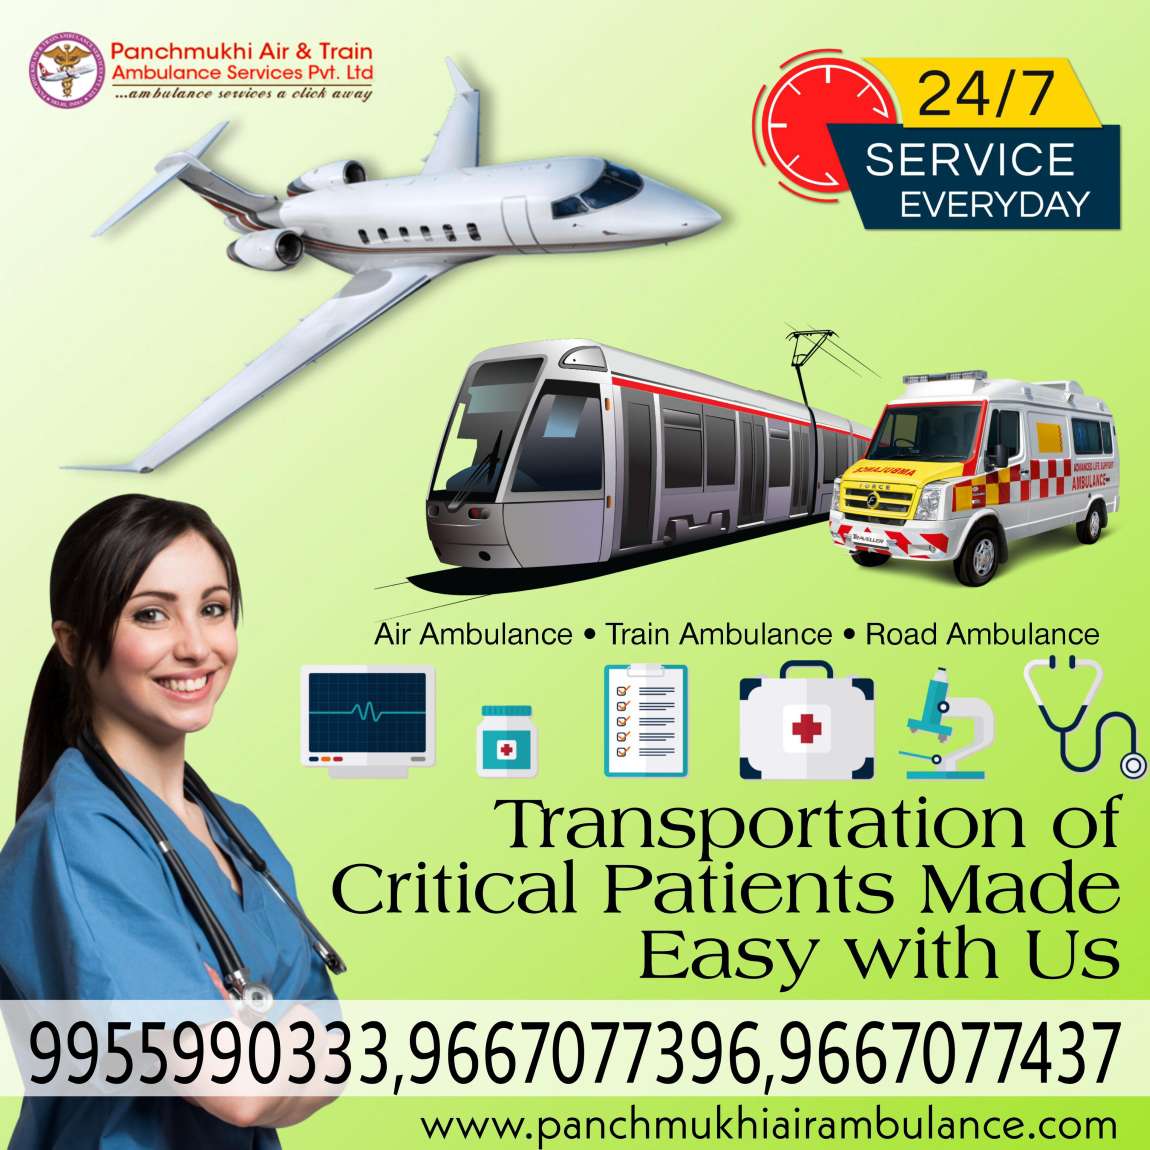 Use Top-Grade Panchmukhi Air Ambulance Services in Gorakhpur with Medical Assistance